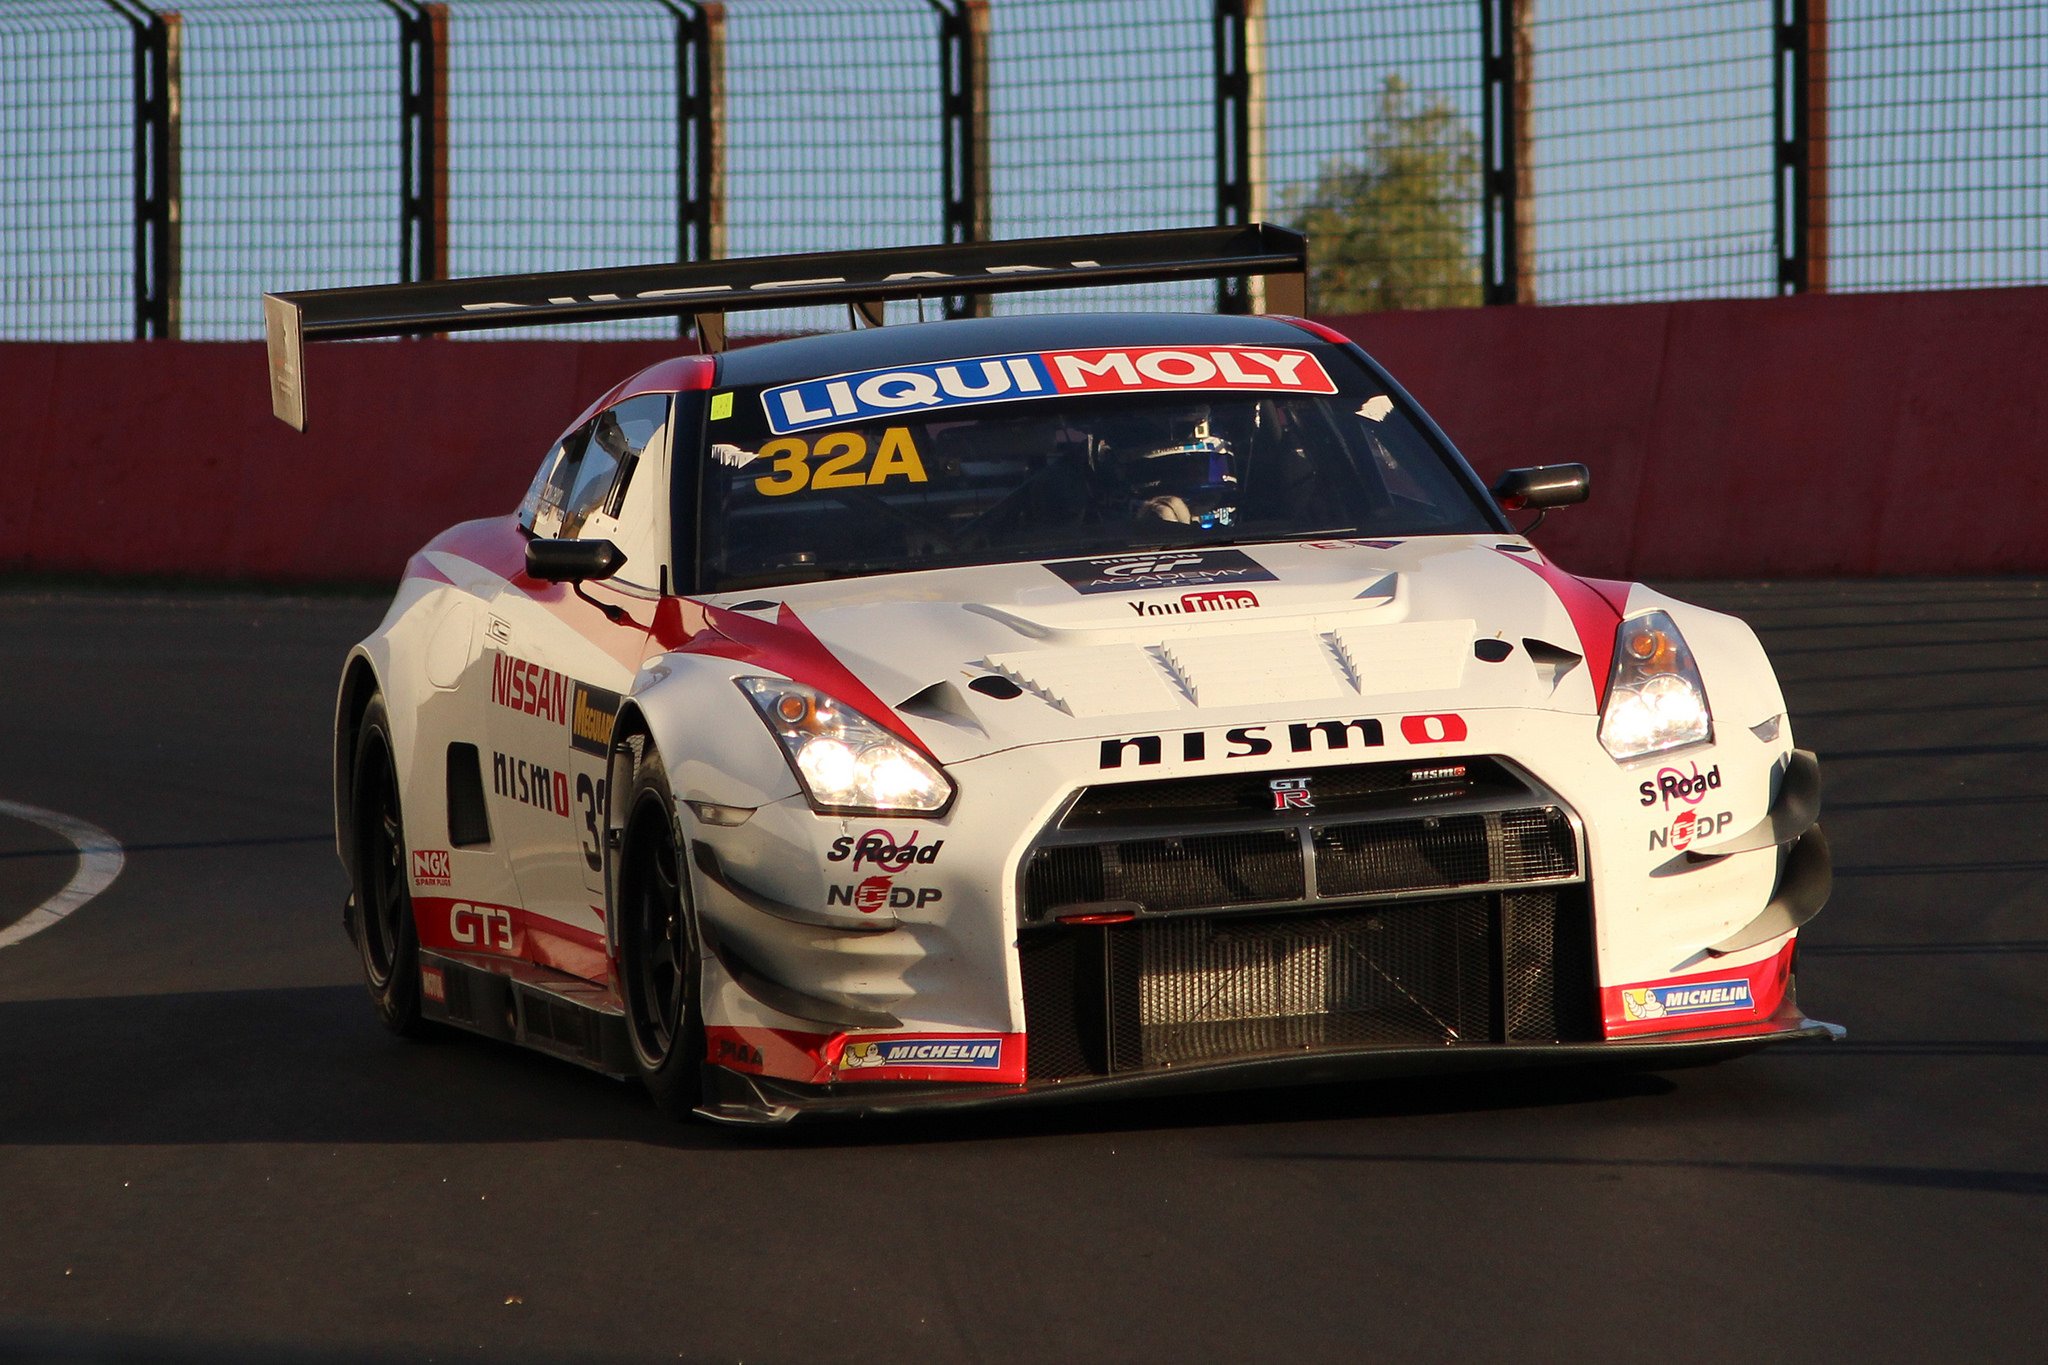 gt r, Nismo, Nissan, R35, Tuning, Supercar, Coupe, Japan, Cars, Race Wallpaper